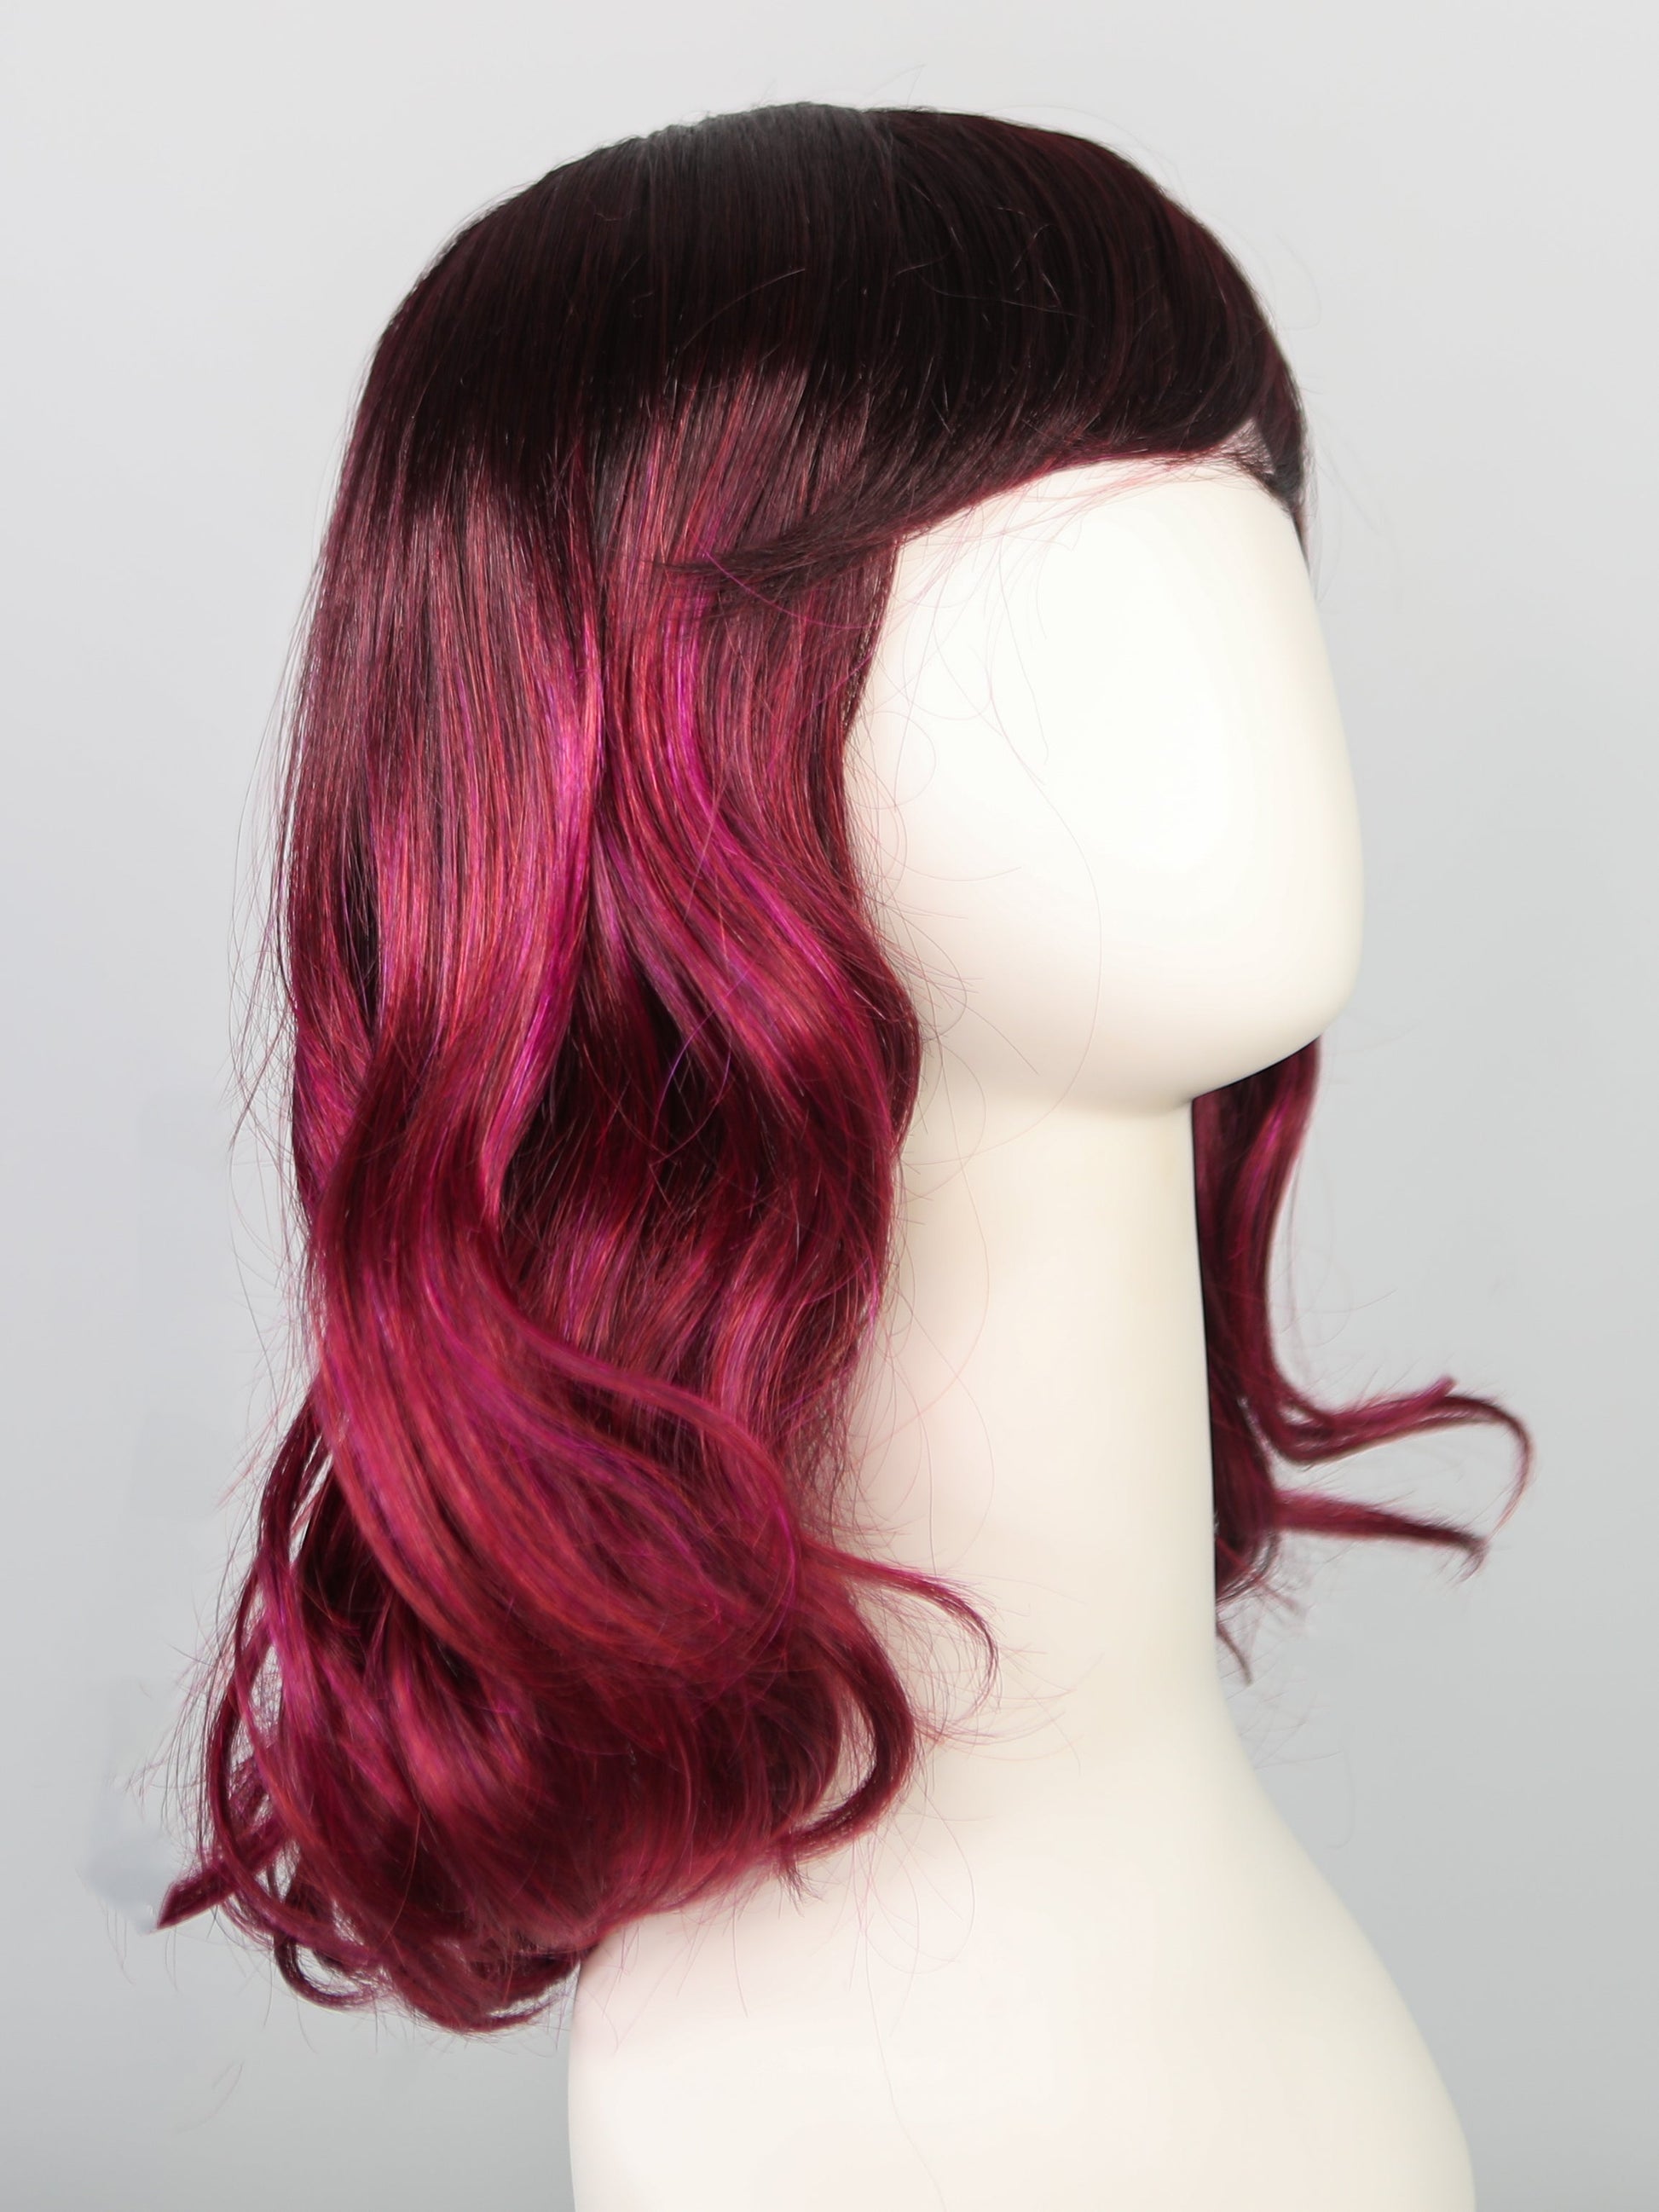 Plumberry Jam-R | Medium Plum Ombre rooted with 50/50 blend of Red/Fuschia